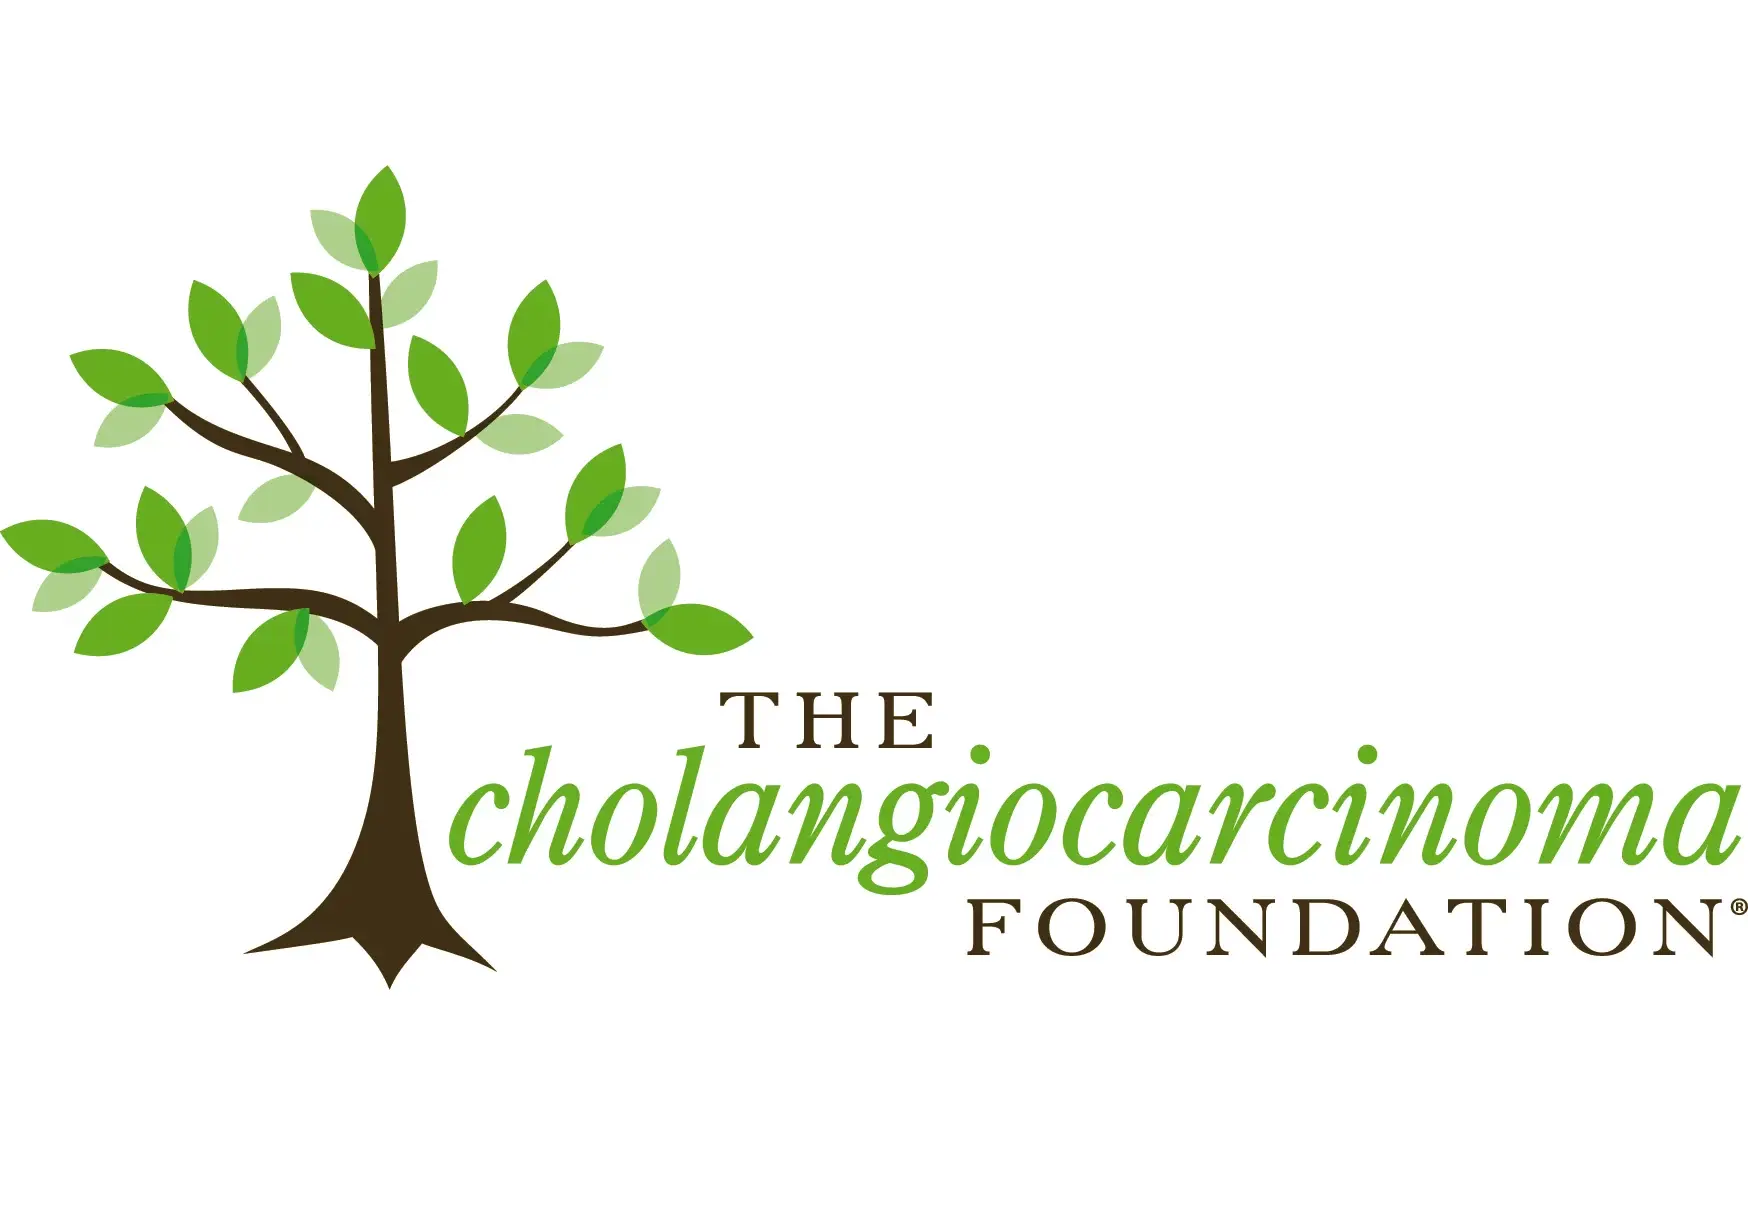 Cholangiocarcinoma Foundation CEO named as a finalist in Cancer Community (C2) Awards